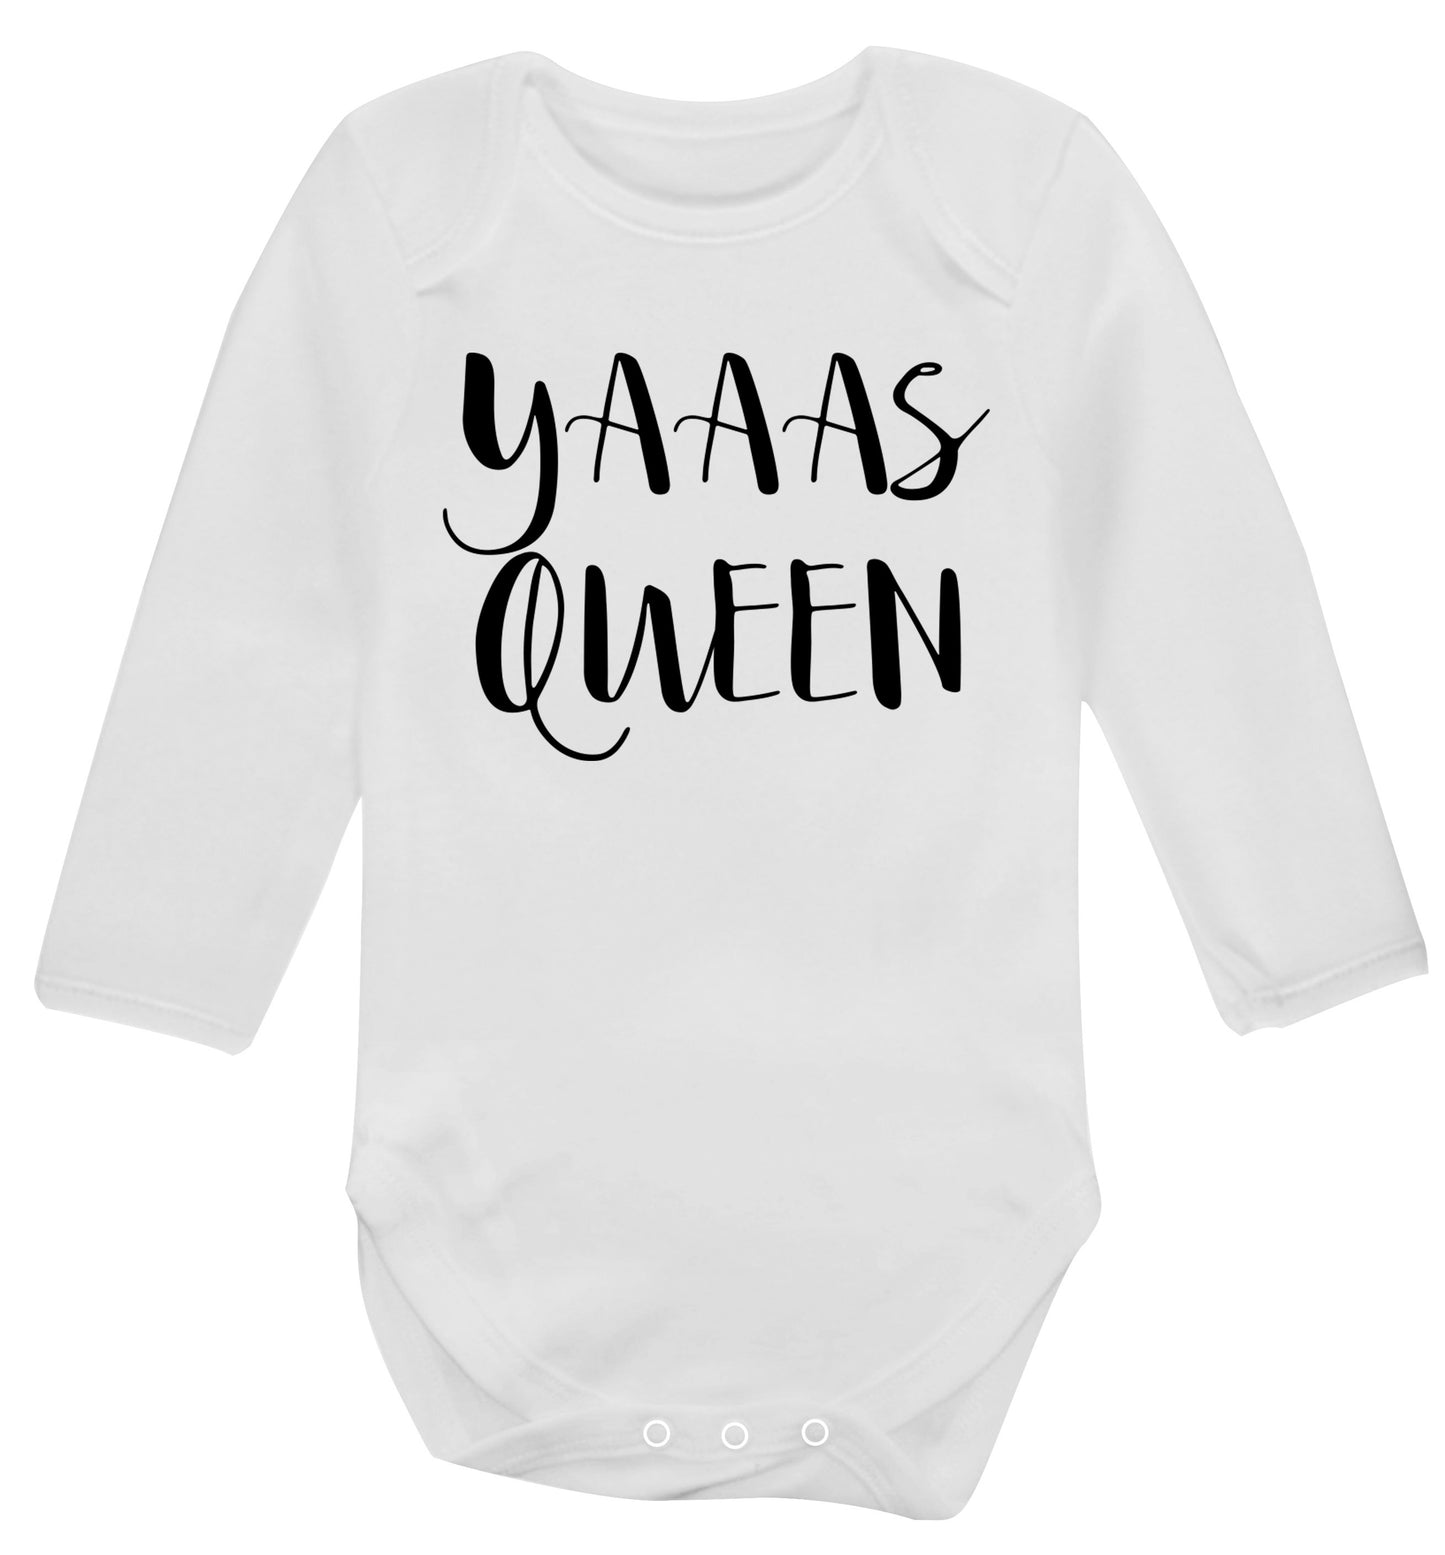 Yas Queen Baby Vest long sleeved white 6-12 months